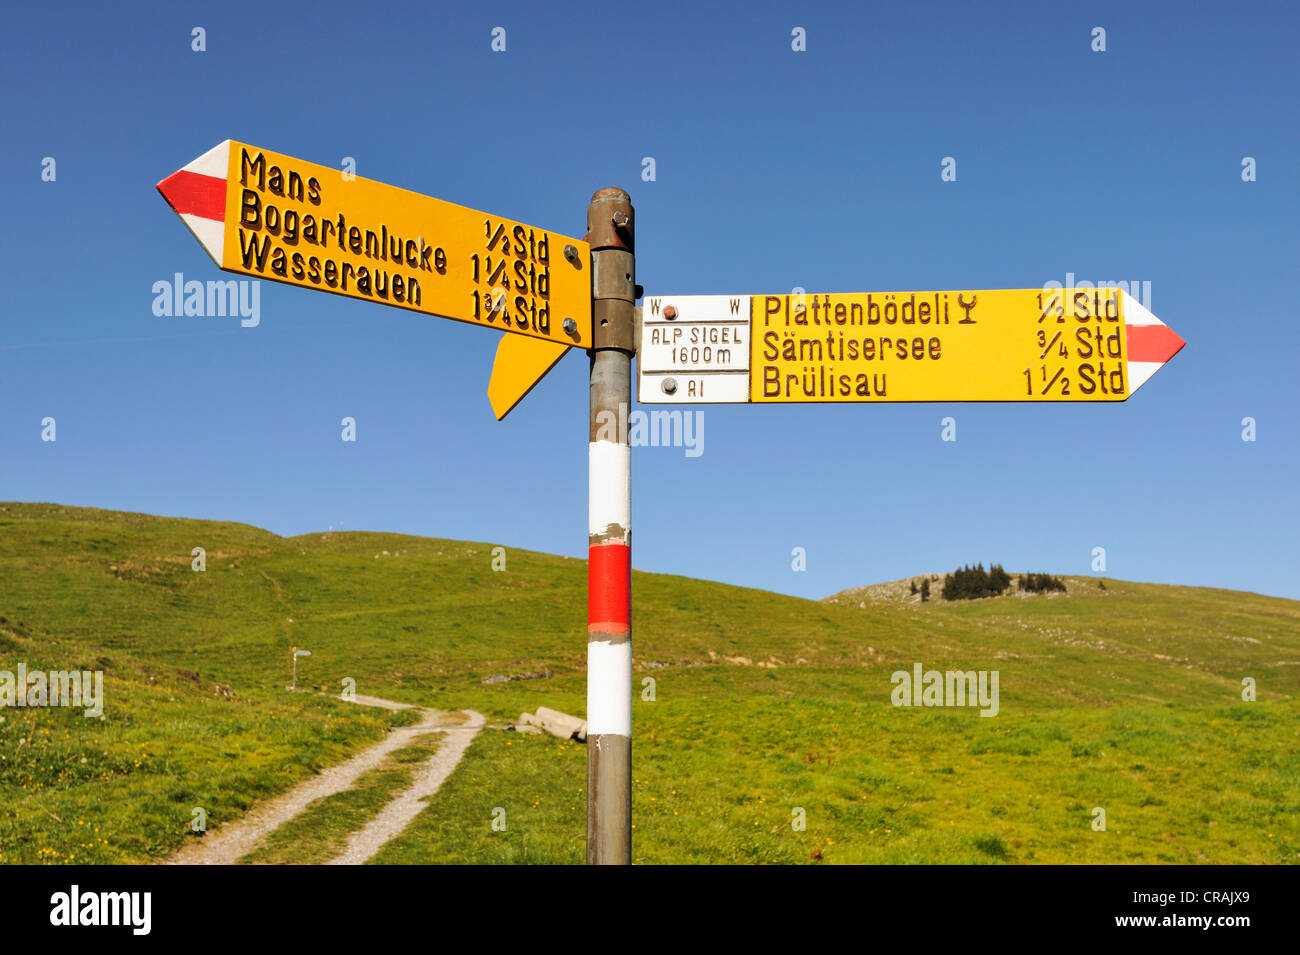 Hiking guide on the high plateau Alp Sigel, 1730 m, in the Appenzell Alps, Canton of Appenzell Innerrhoden, Switzerland, Europe Stock Photo